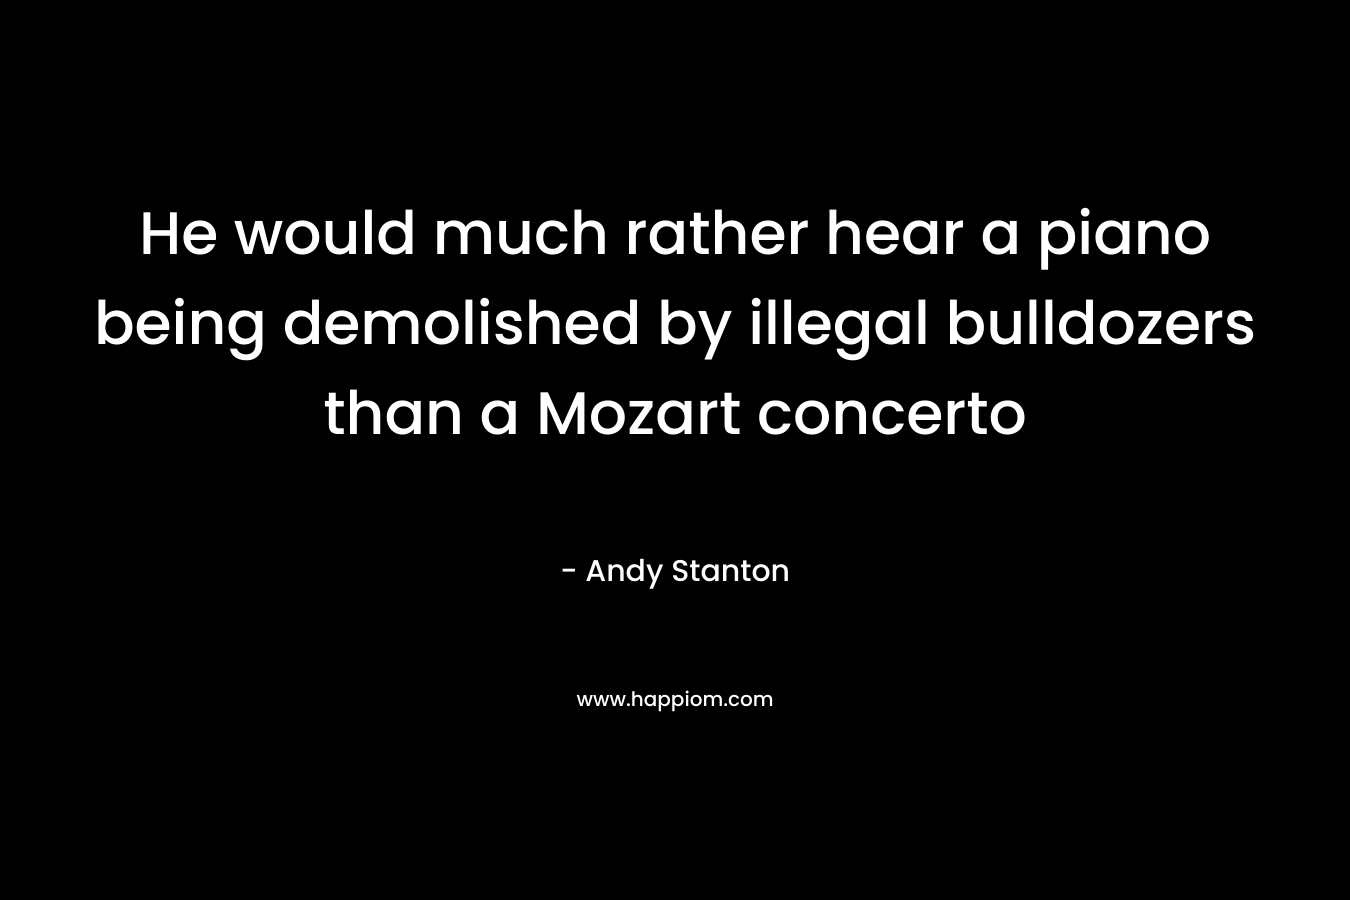 He would much rather hear a piano being demolished by illegal bulldozers than a Mozart concerto – Andy Stanton